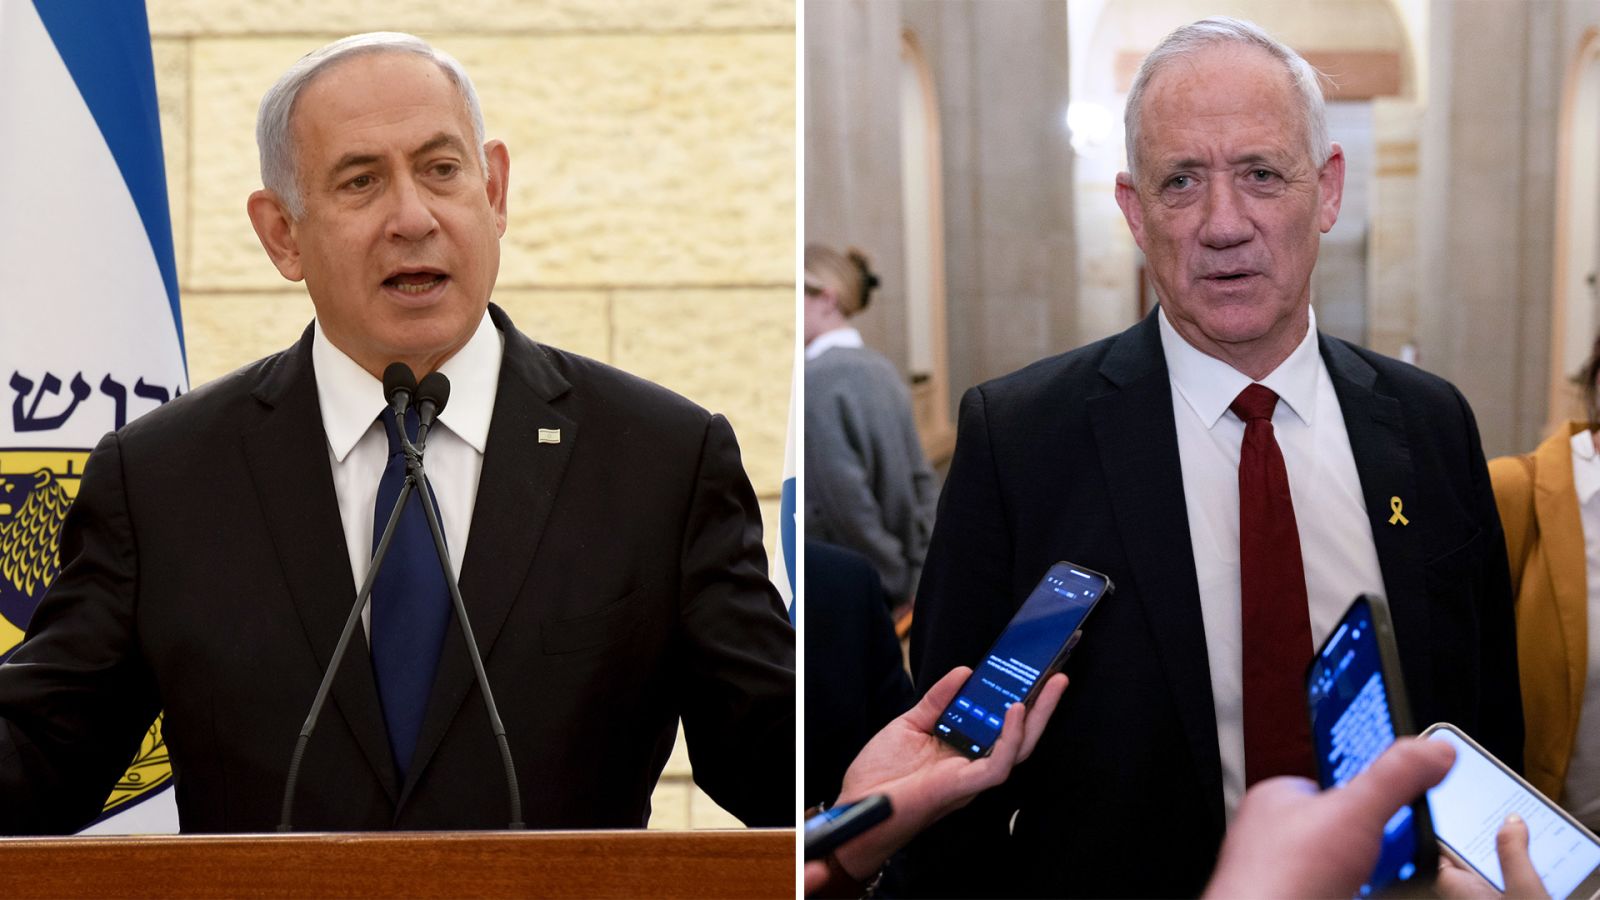 The political tensions of the Israeli Government boil over and reveal a brand new hazard for Netanyahu (Analysis)